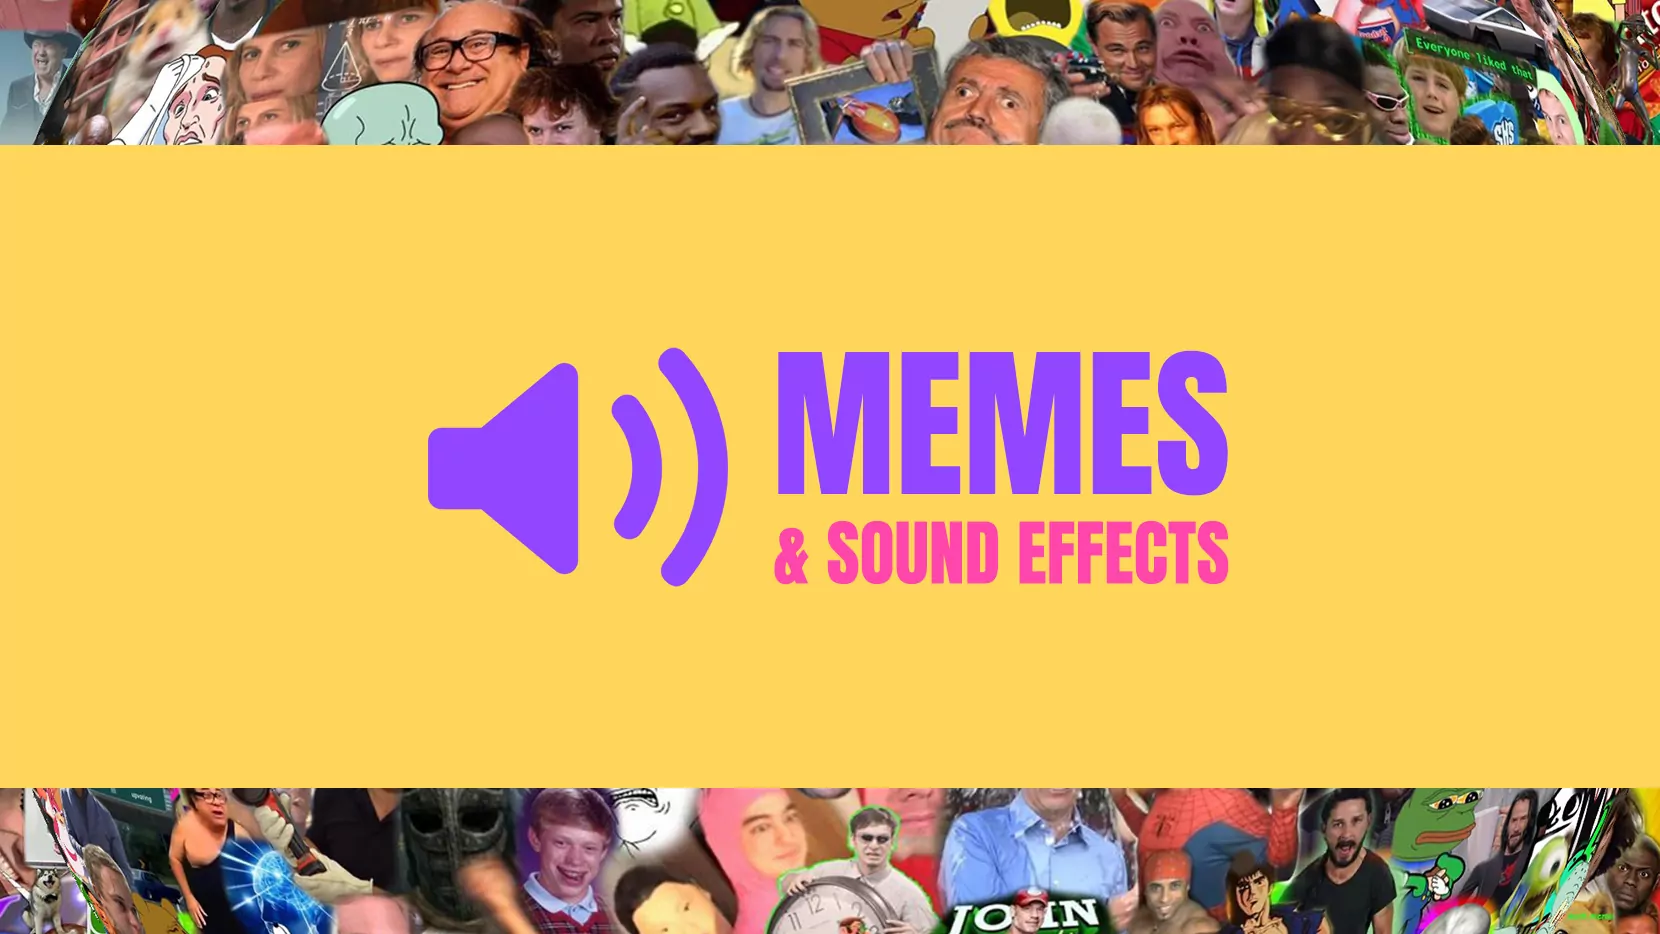 Memes and Sound Effects